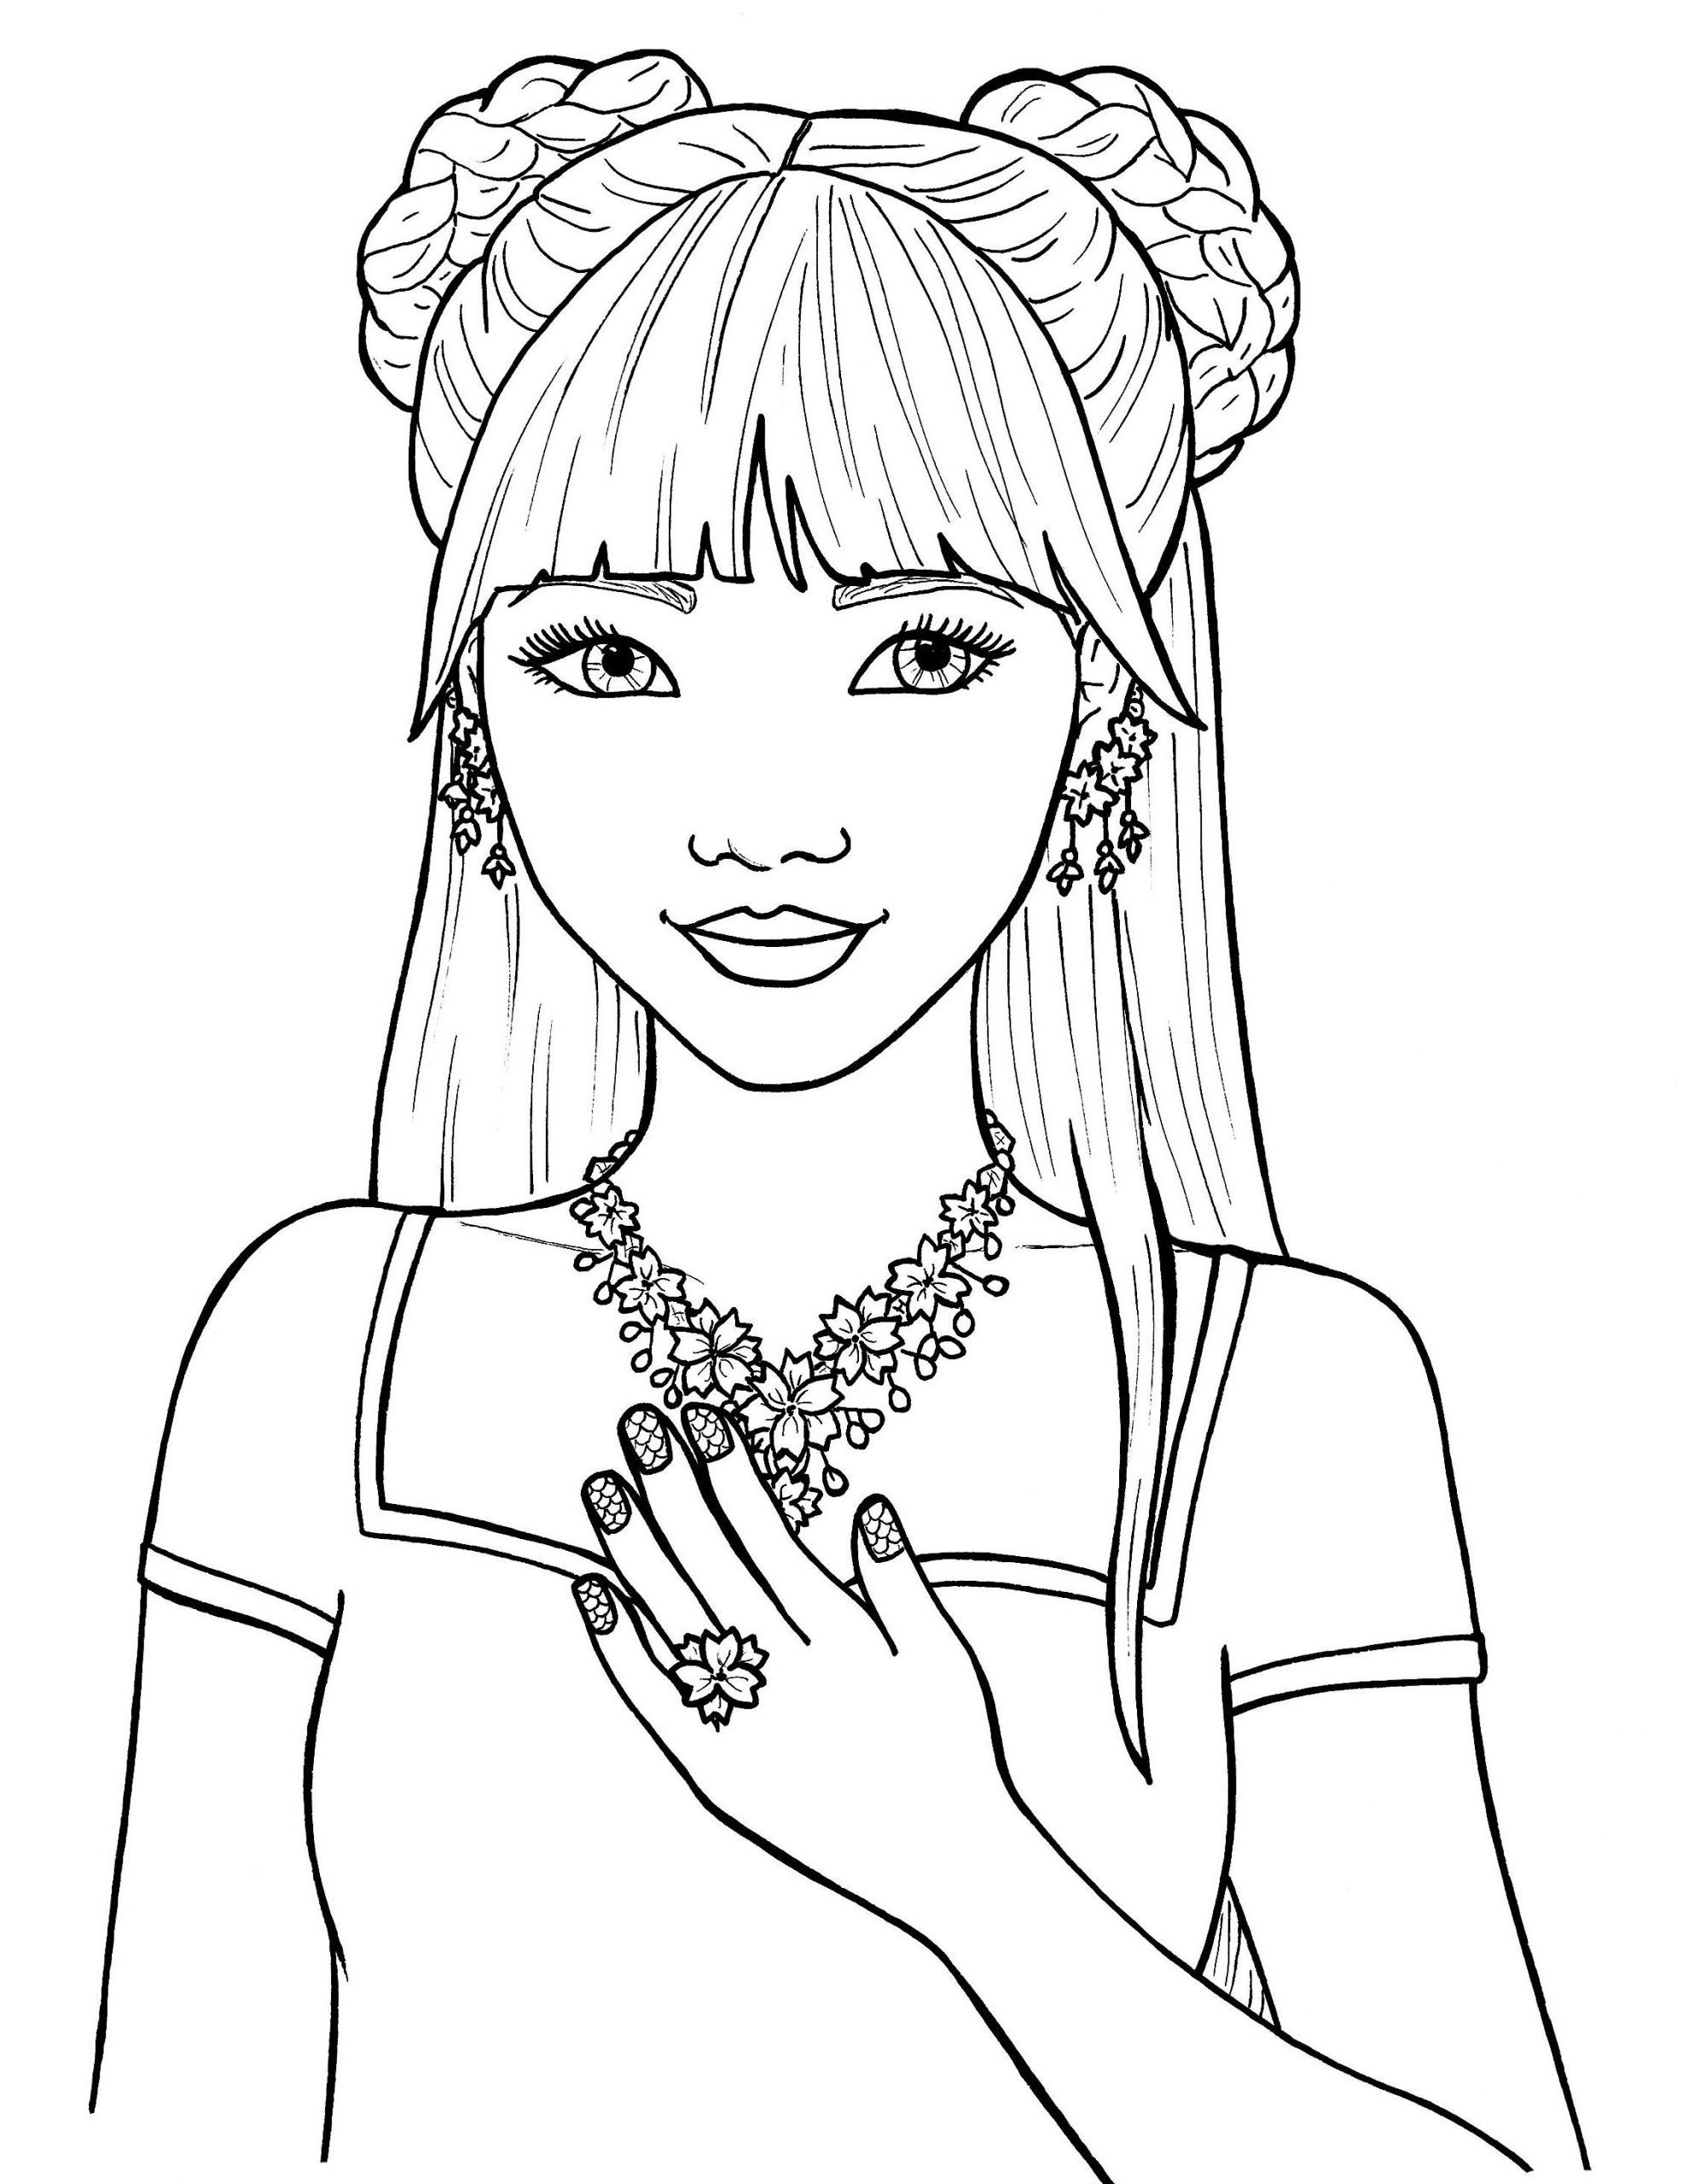 Coloring Sheets For Girls
 Pretty Girls Coloring Pages Free